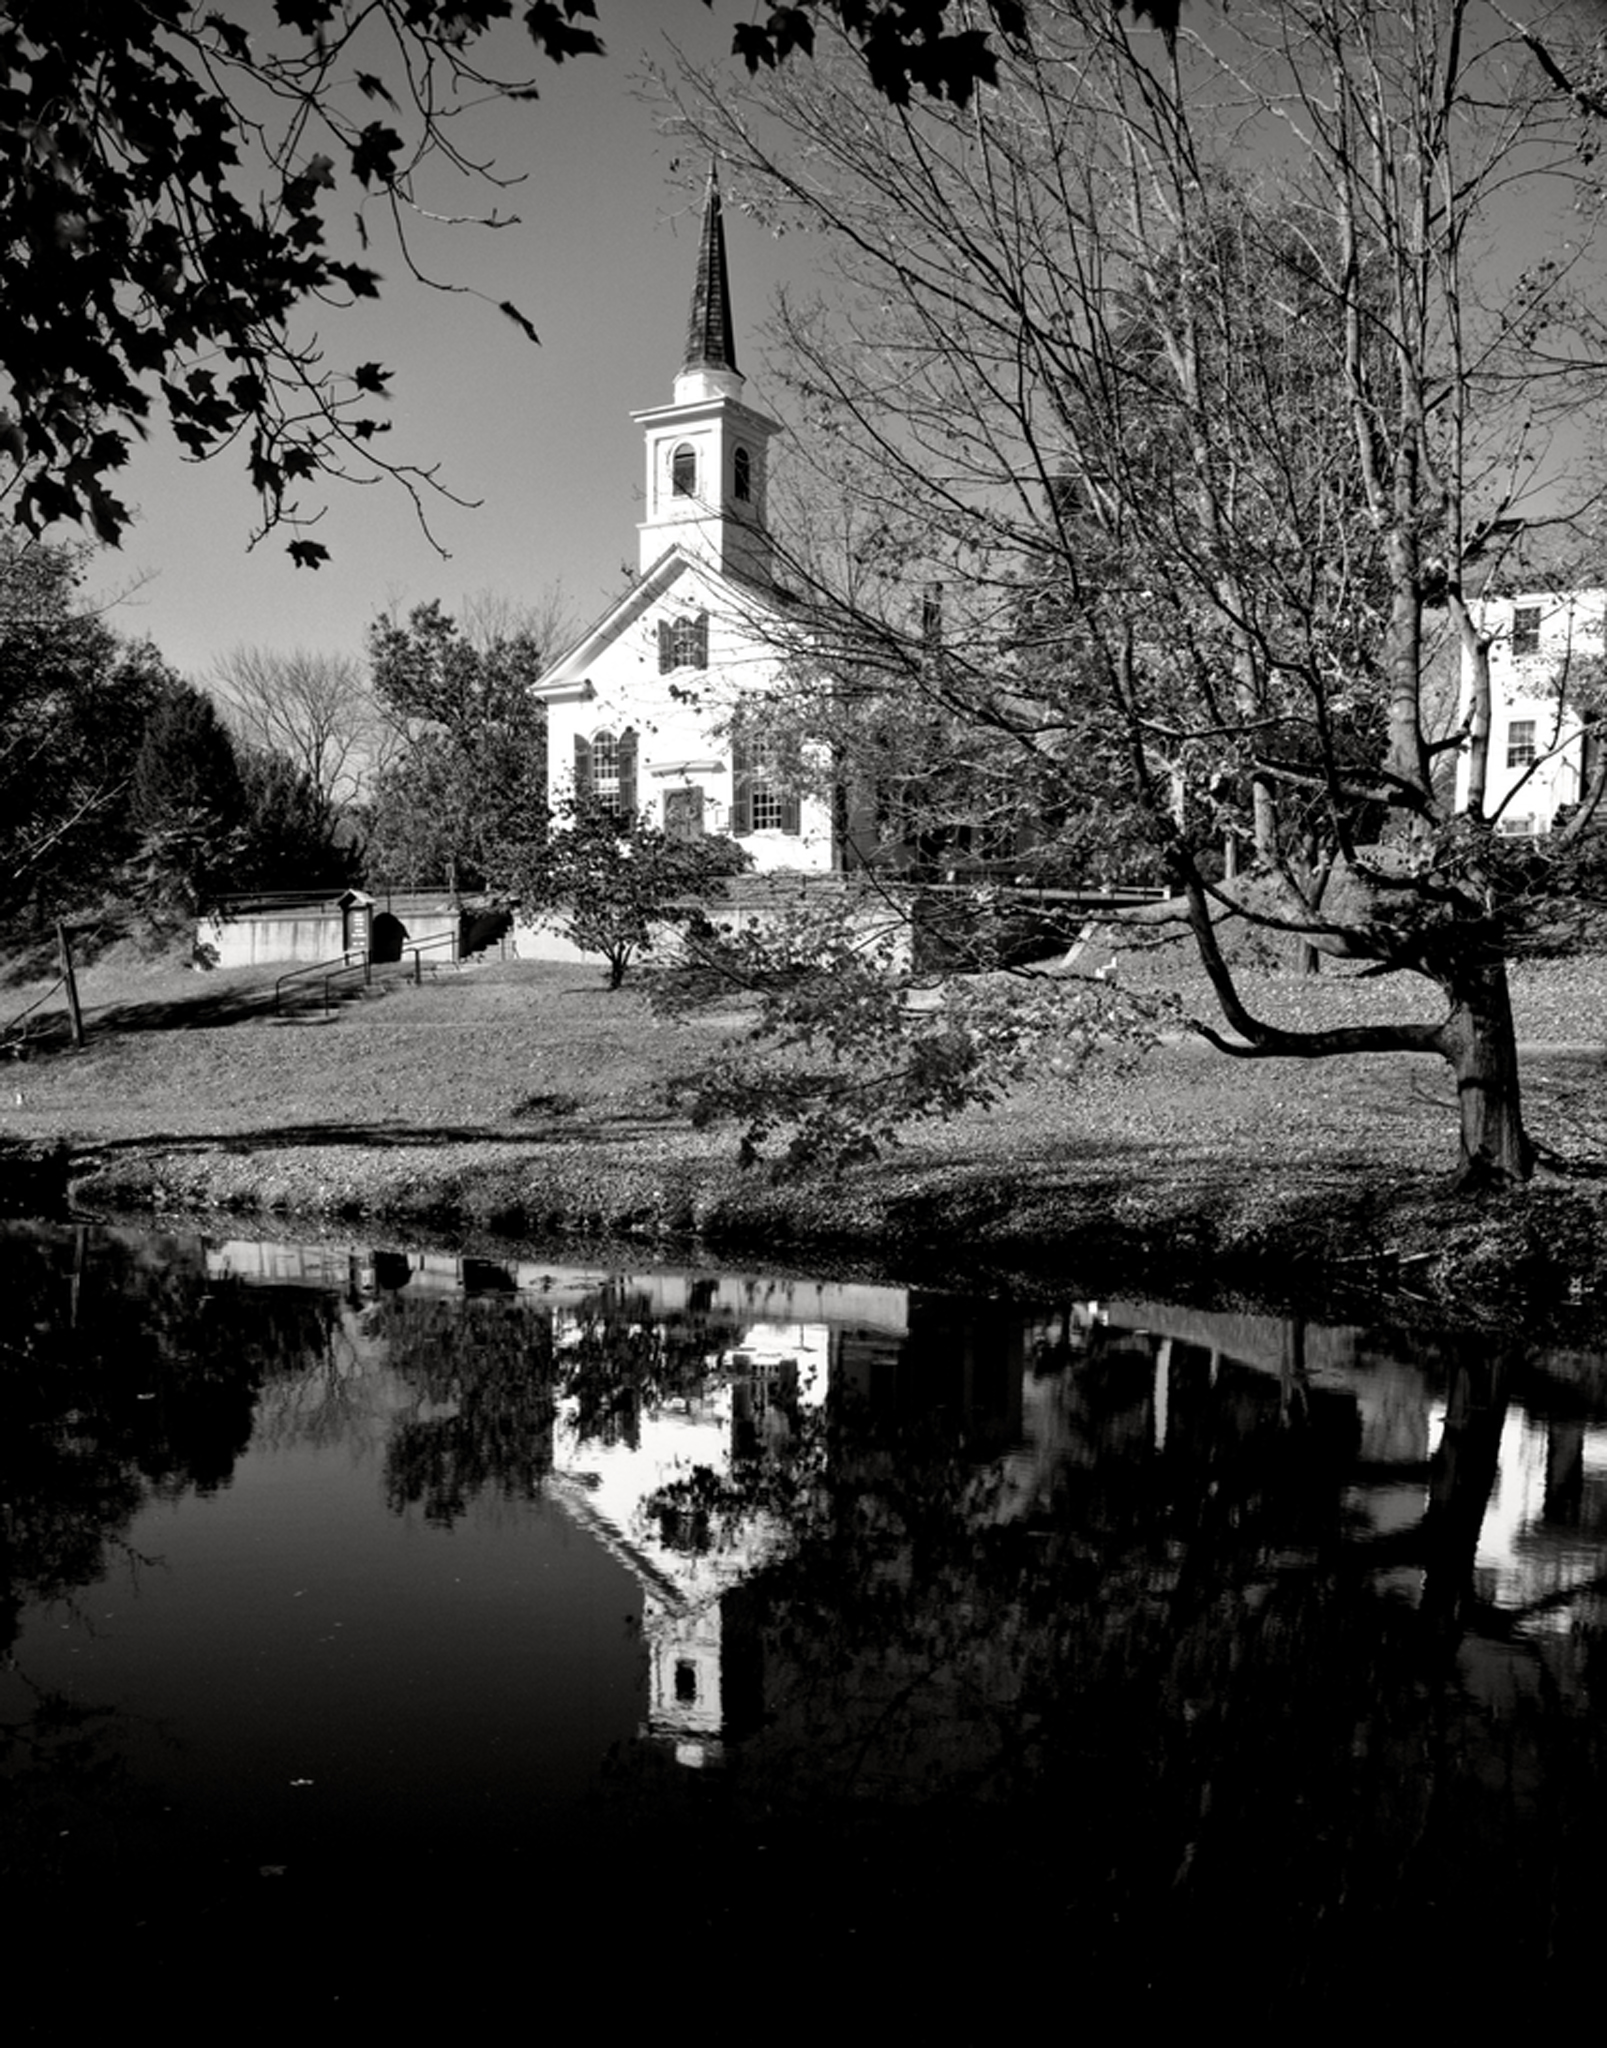 4x5_for_365_project_0304_Waterloo_Village_church_reflection.jpg